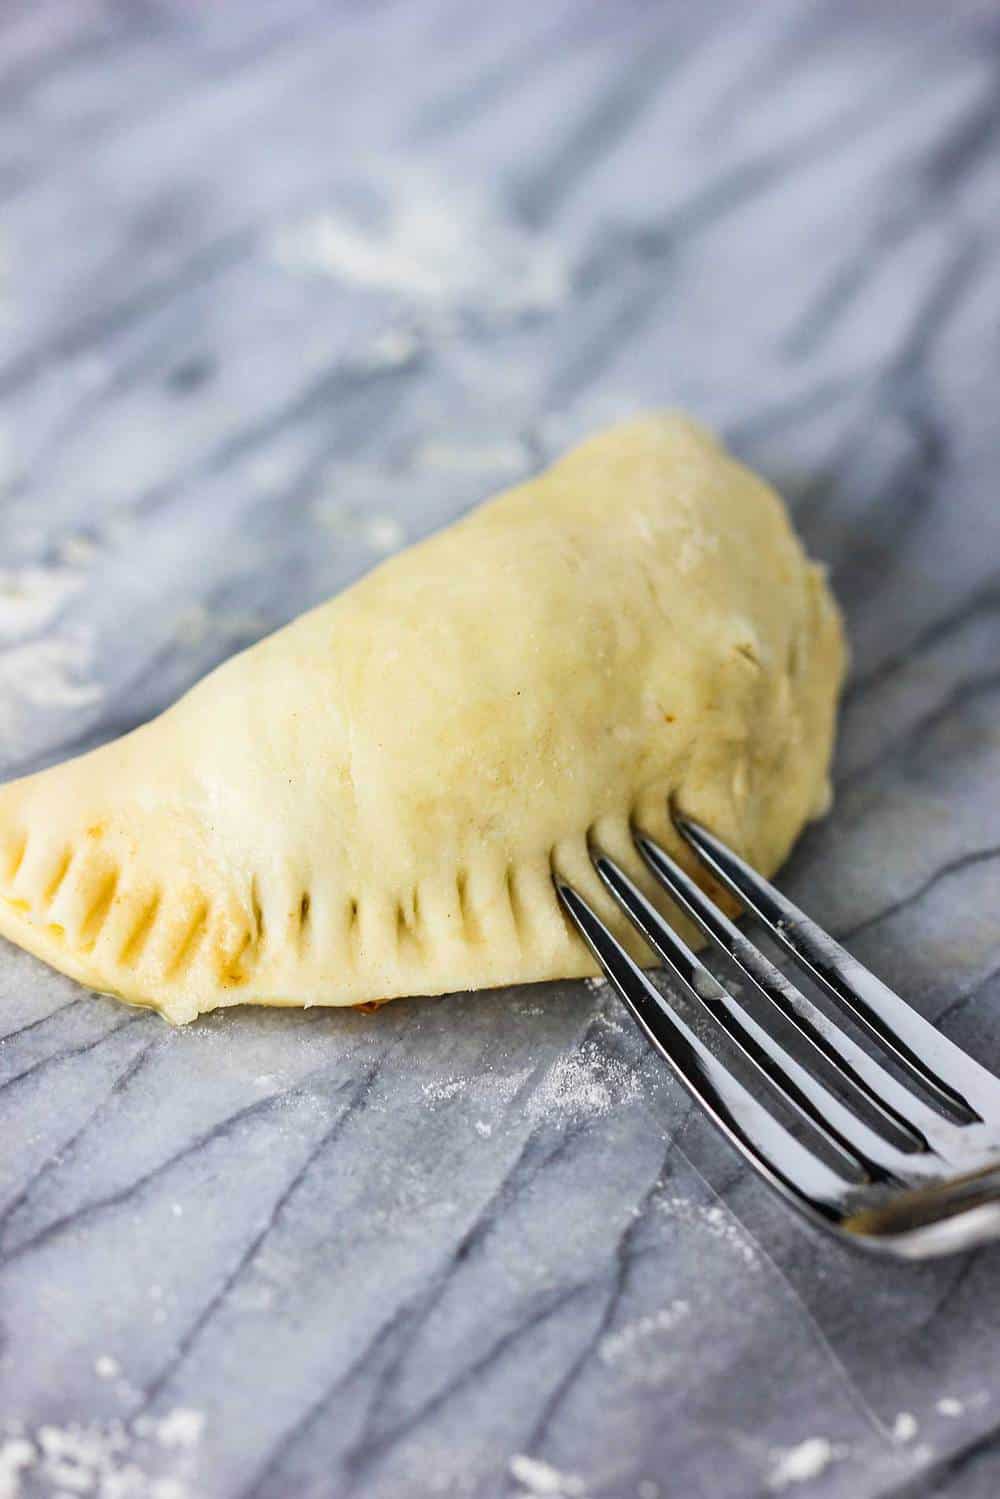 A fork crimping the edges of an uncooked classic meat pie